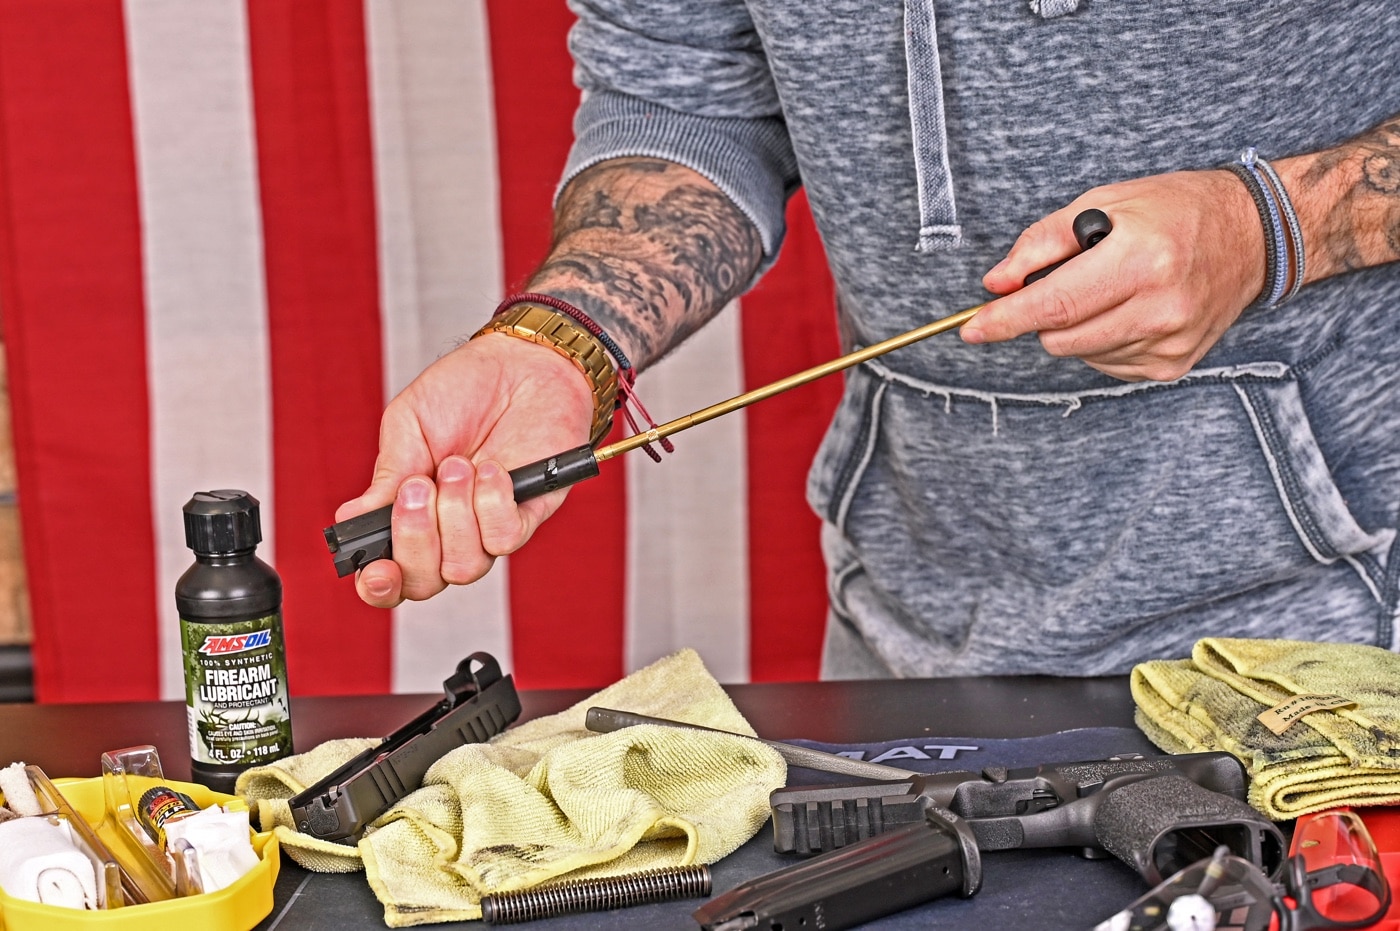 The author is working to get his pistol clean in this photo. He is showing how to clean the barrel with patches. The general idea is to keep running patches through the barrel — from the breech end if possible — until you start getting clean patches. When you run it through the barrel, you do not want to damage the muzzle with your cleaning rod. That's why many people recommend pushing the patches through from the back of the barrel.